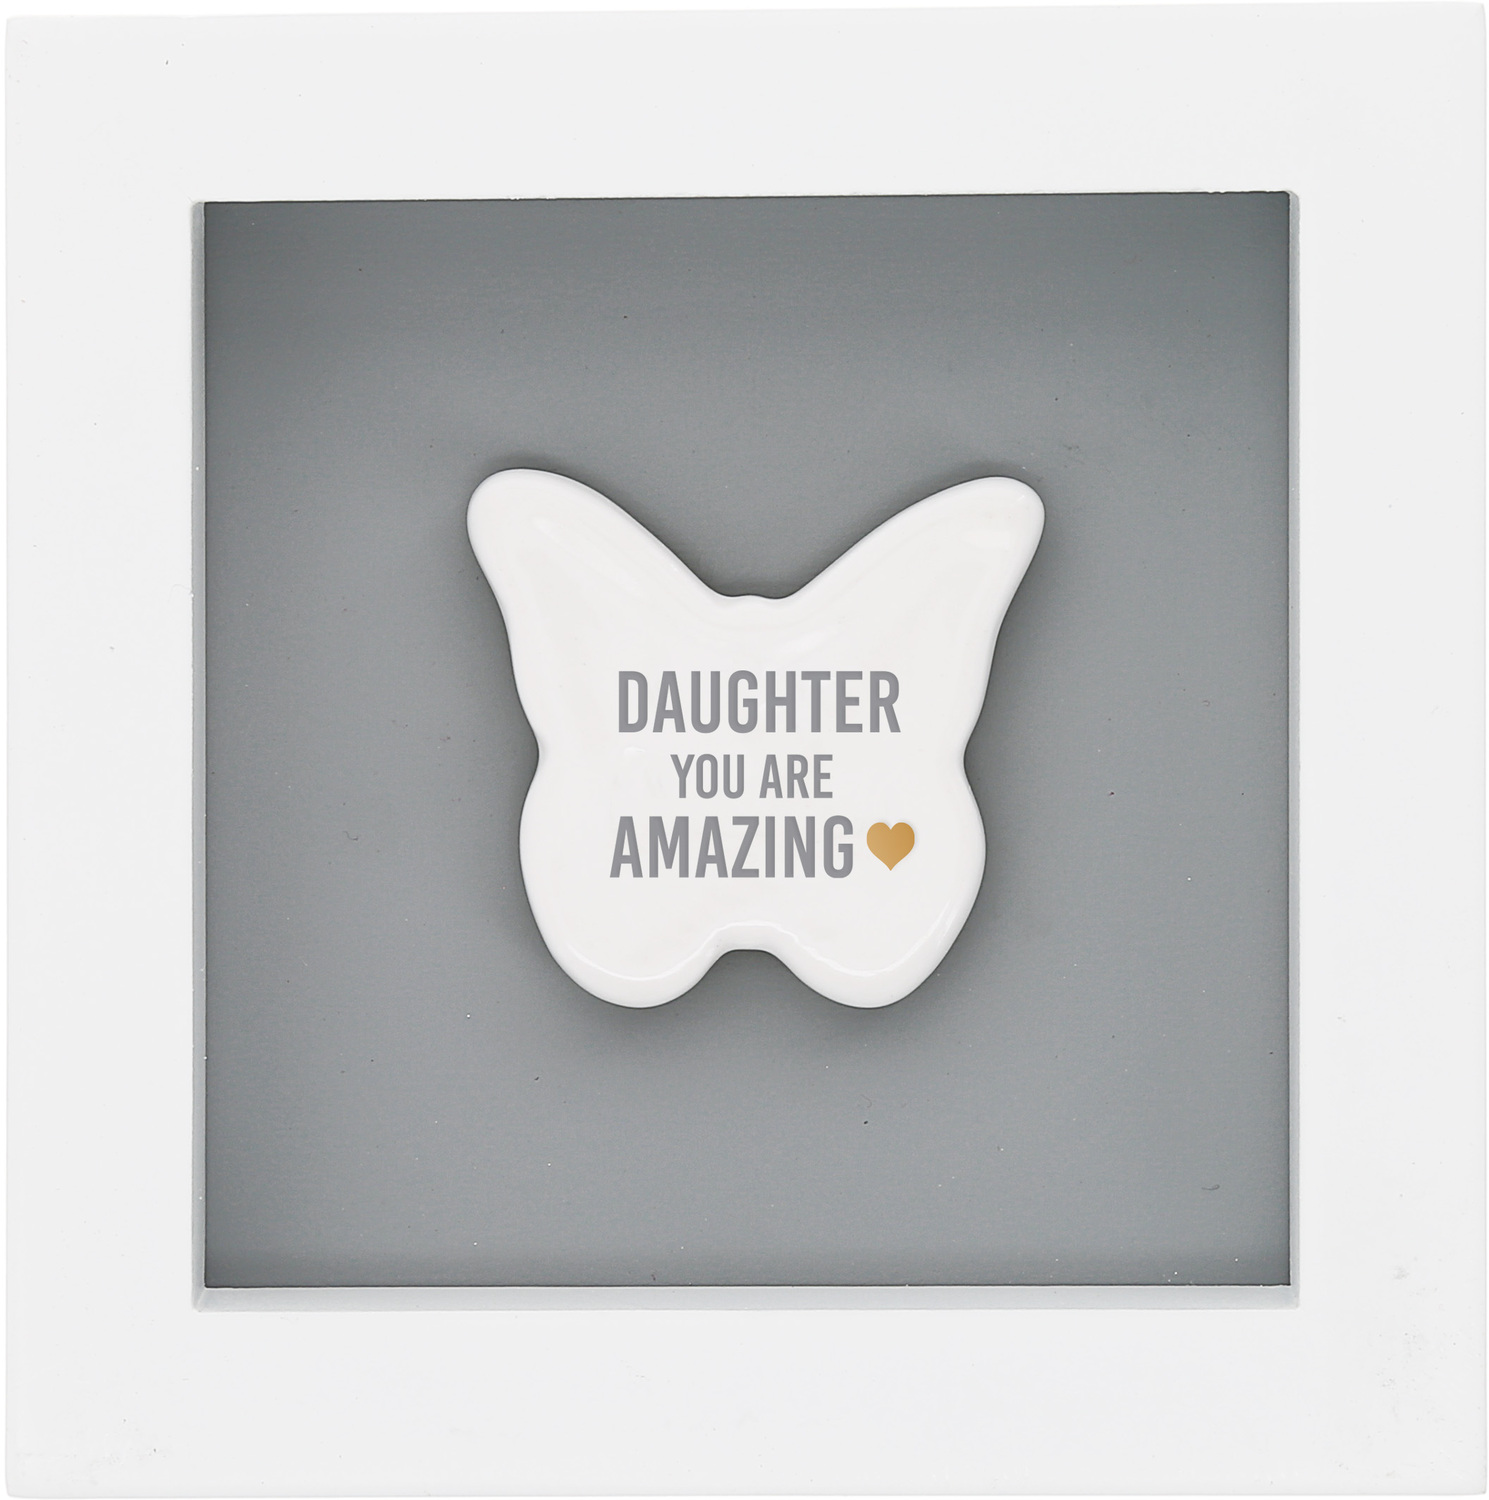 Daughter by Said with Love - Daughter - 4.75" Plaque